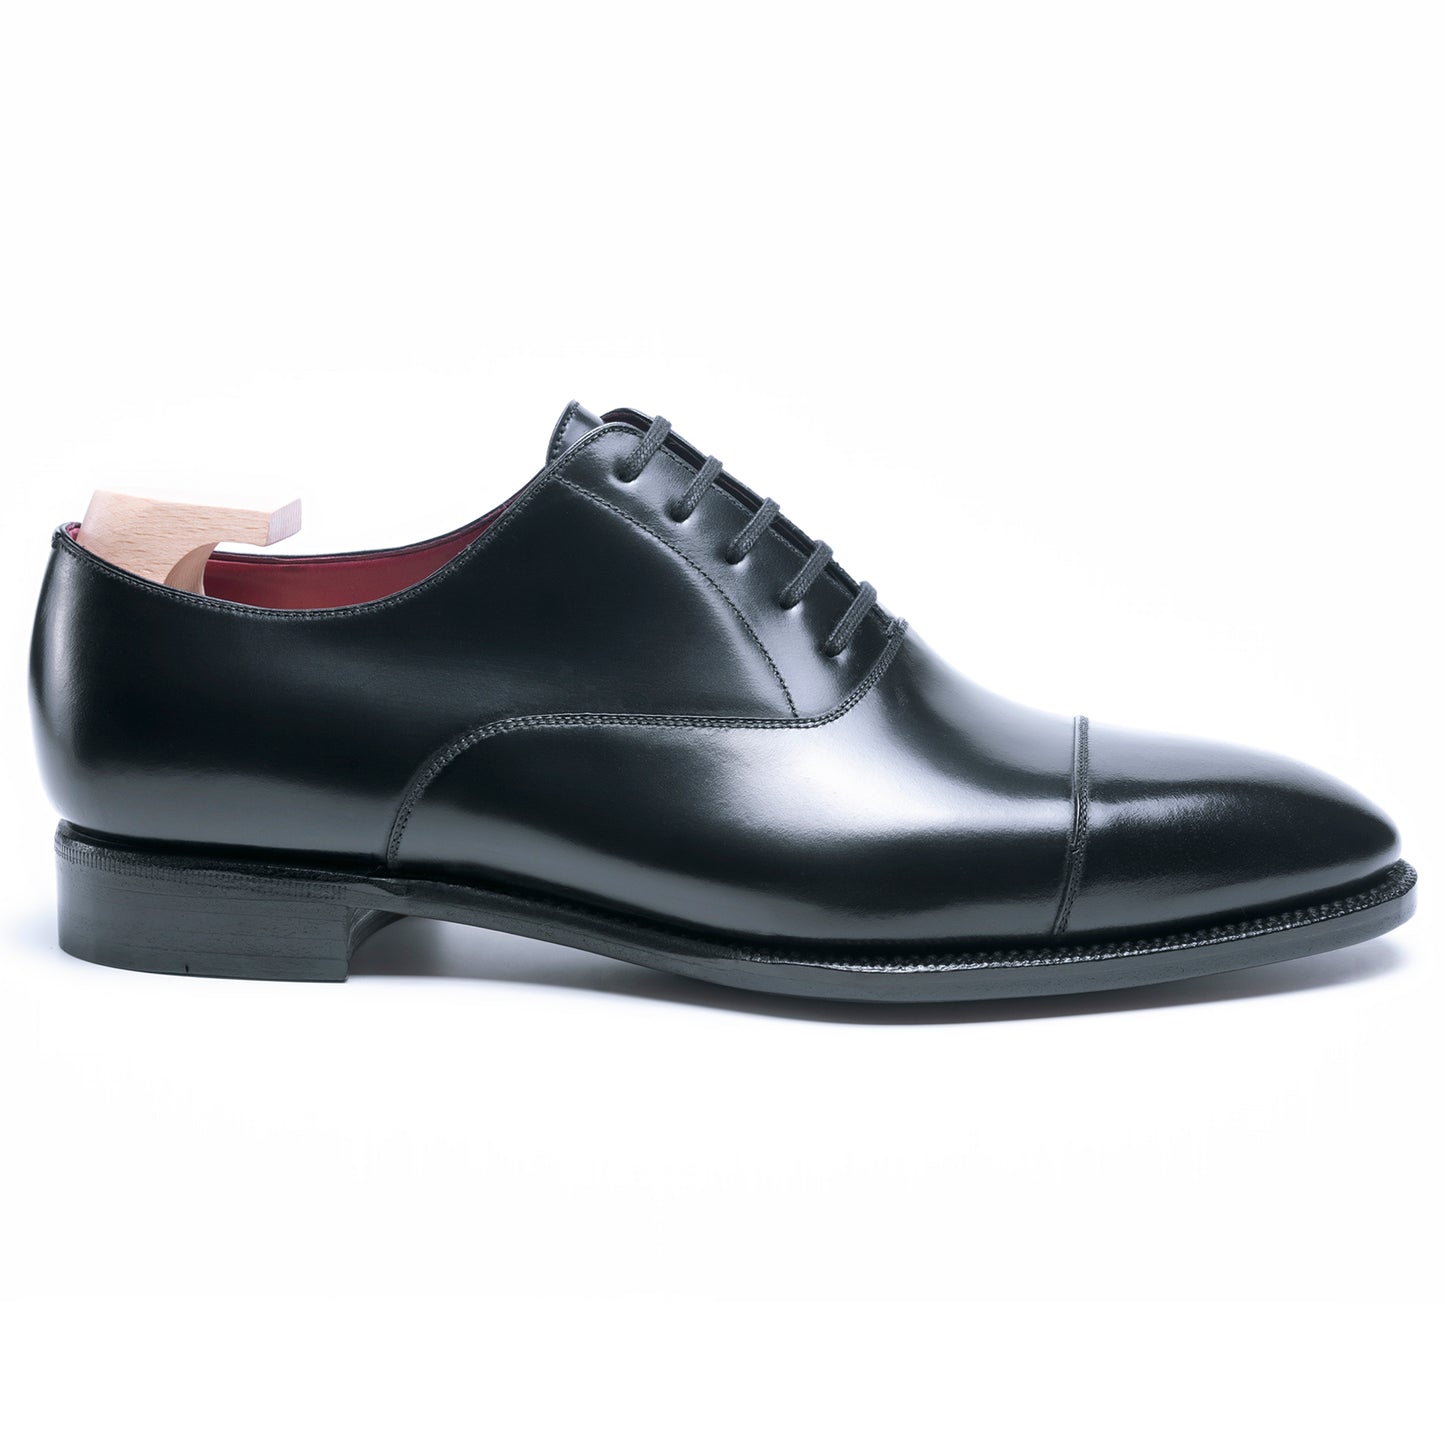 TLB Mallorca leather shoes - Men's Oxford shoes